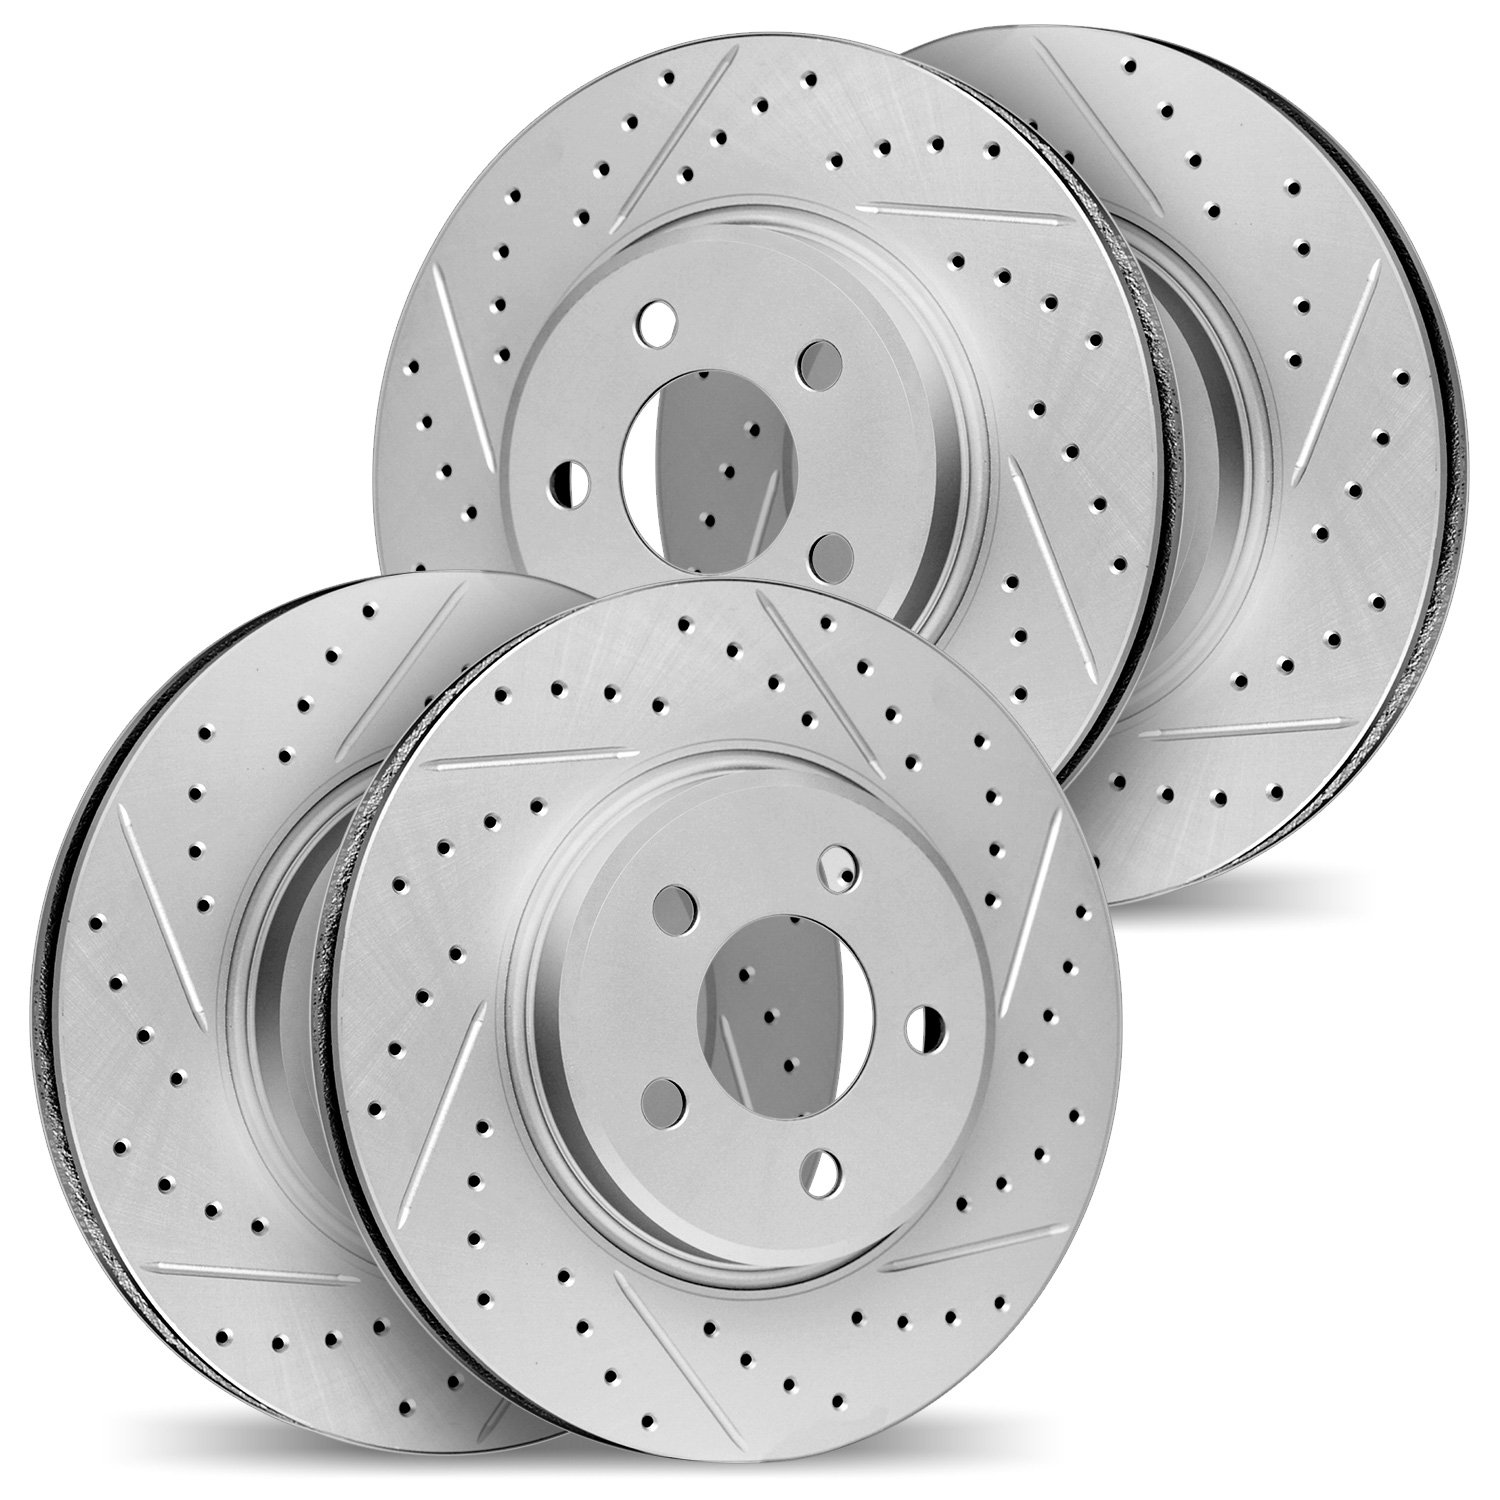 2004-02011 Geoperformance Drilled/Slotted Brake Rotors, 2008-2009 Multiple Makes/Models, Position: Front and Rear